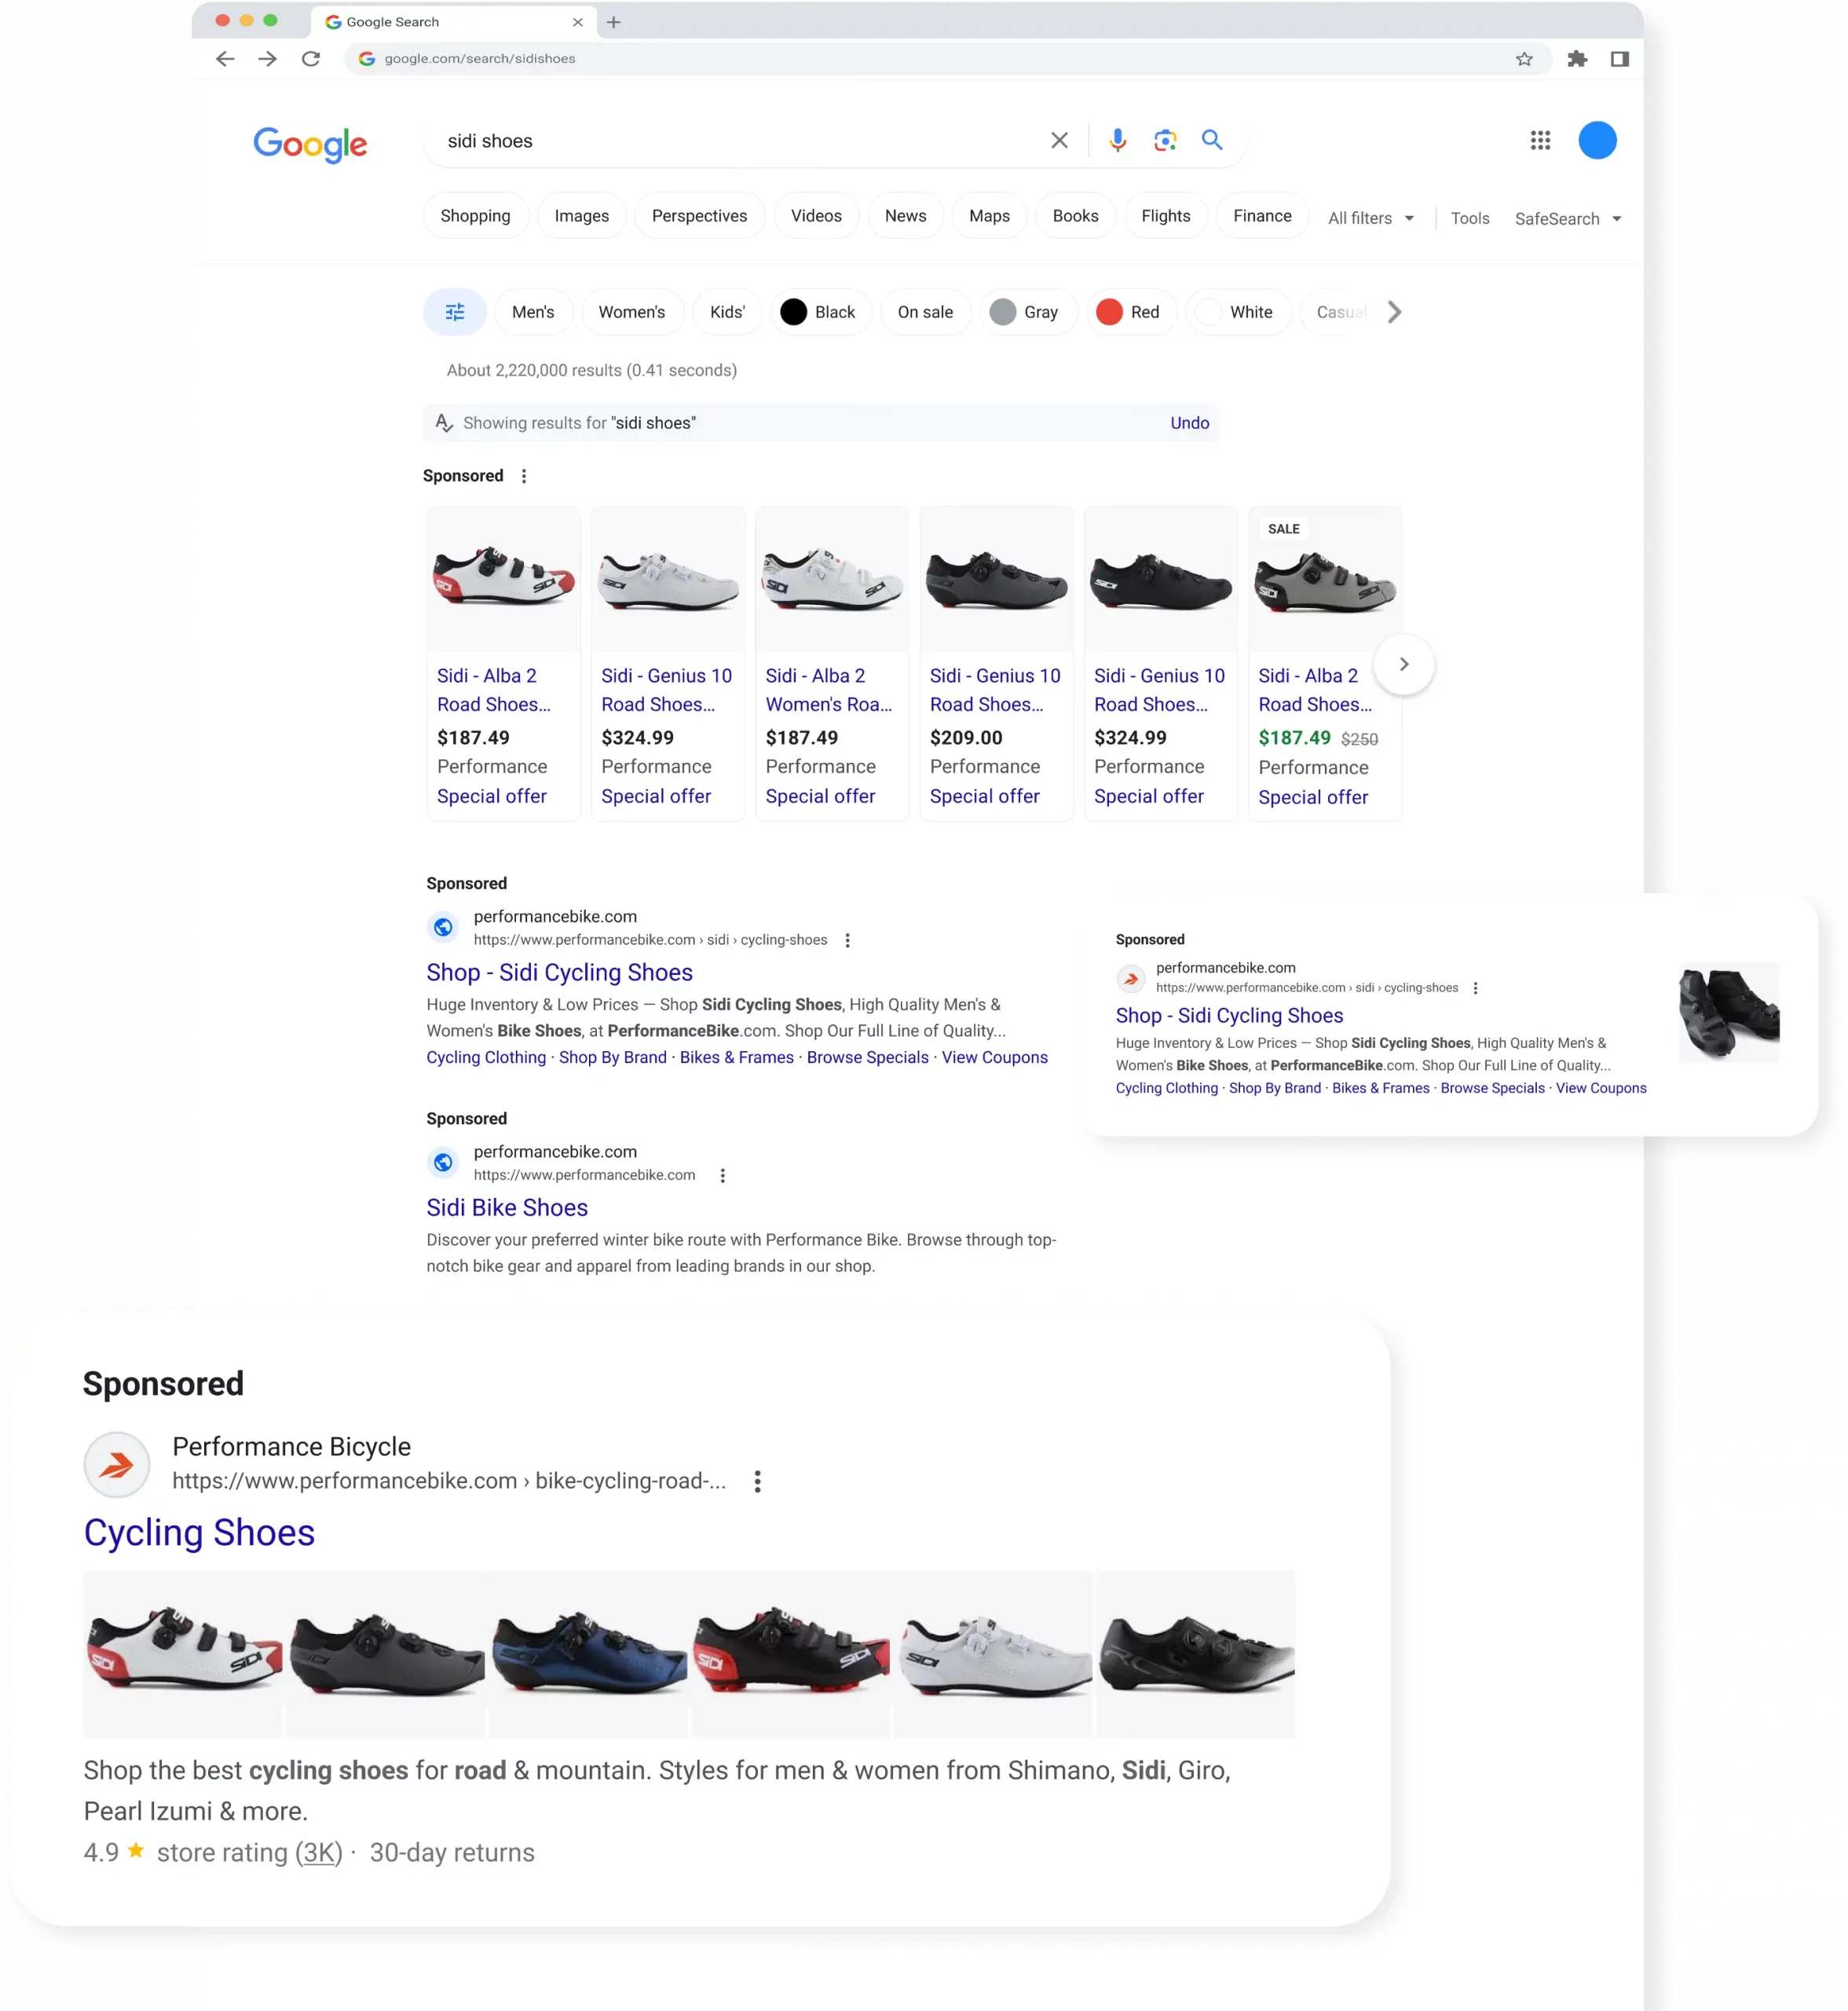 Google search page displaying Performance Bicycle's sponsored ads for Sidi cycling shoes.